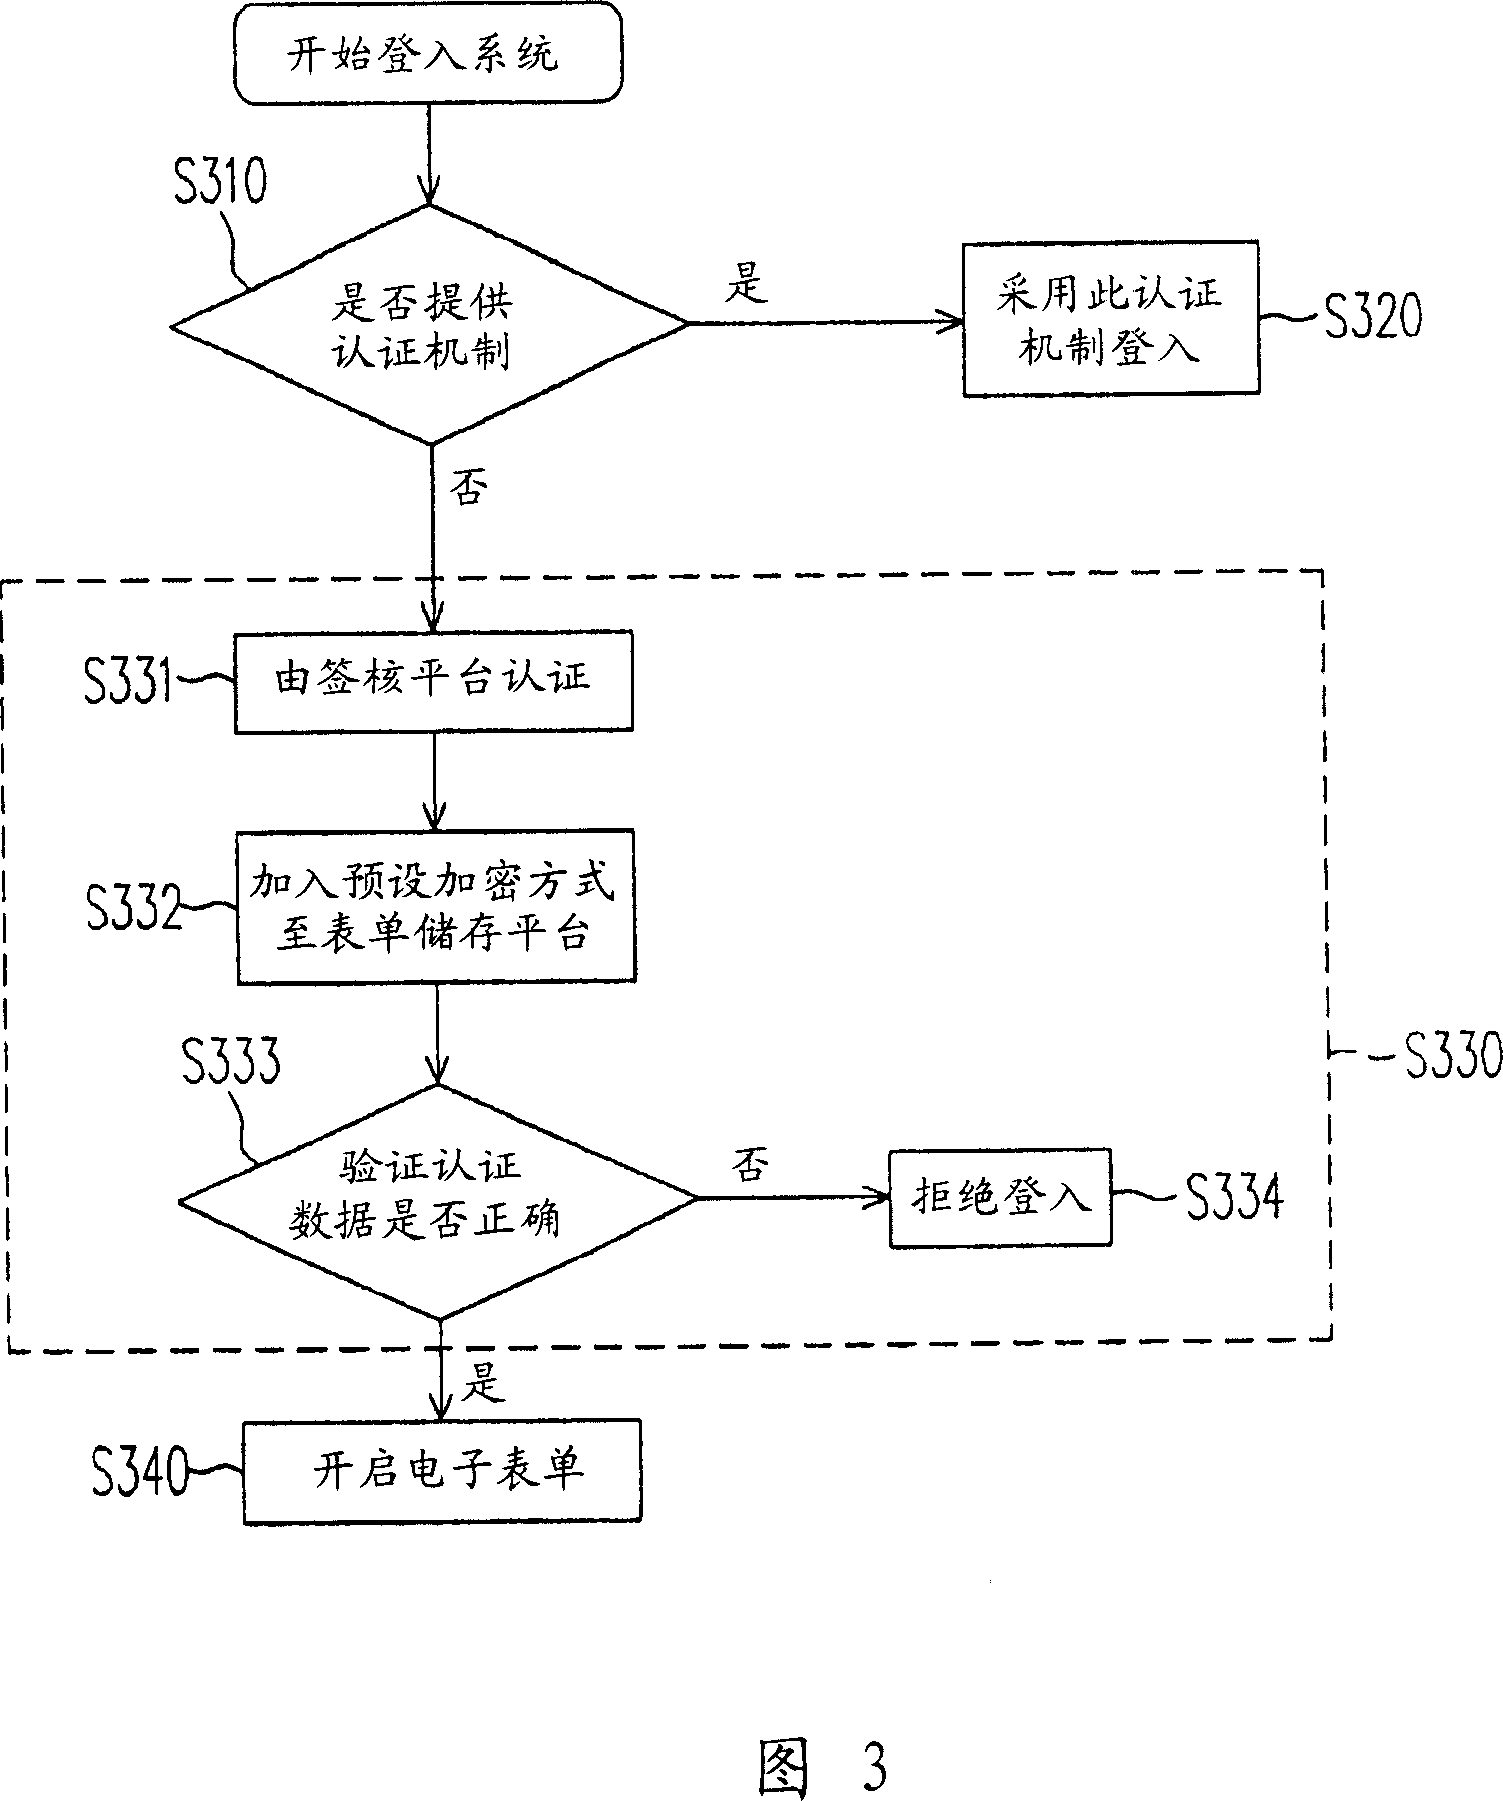 Transplatform tables and lists approving system and method